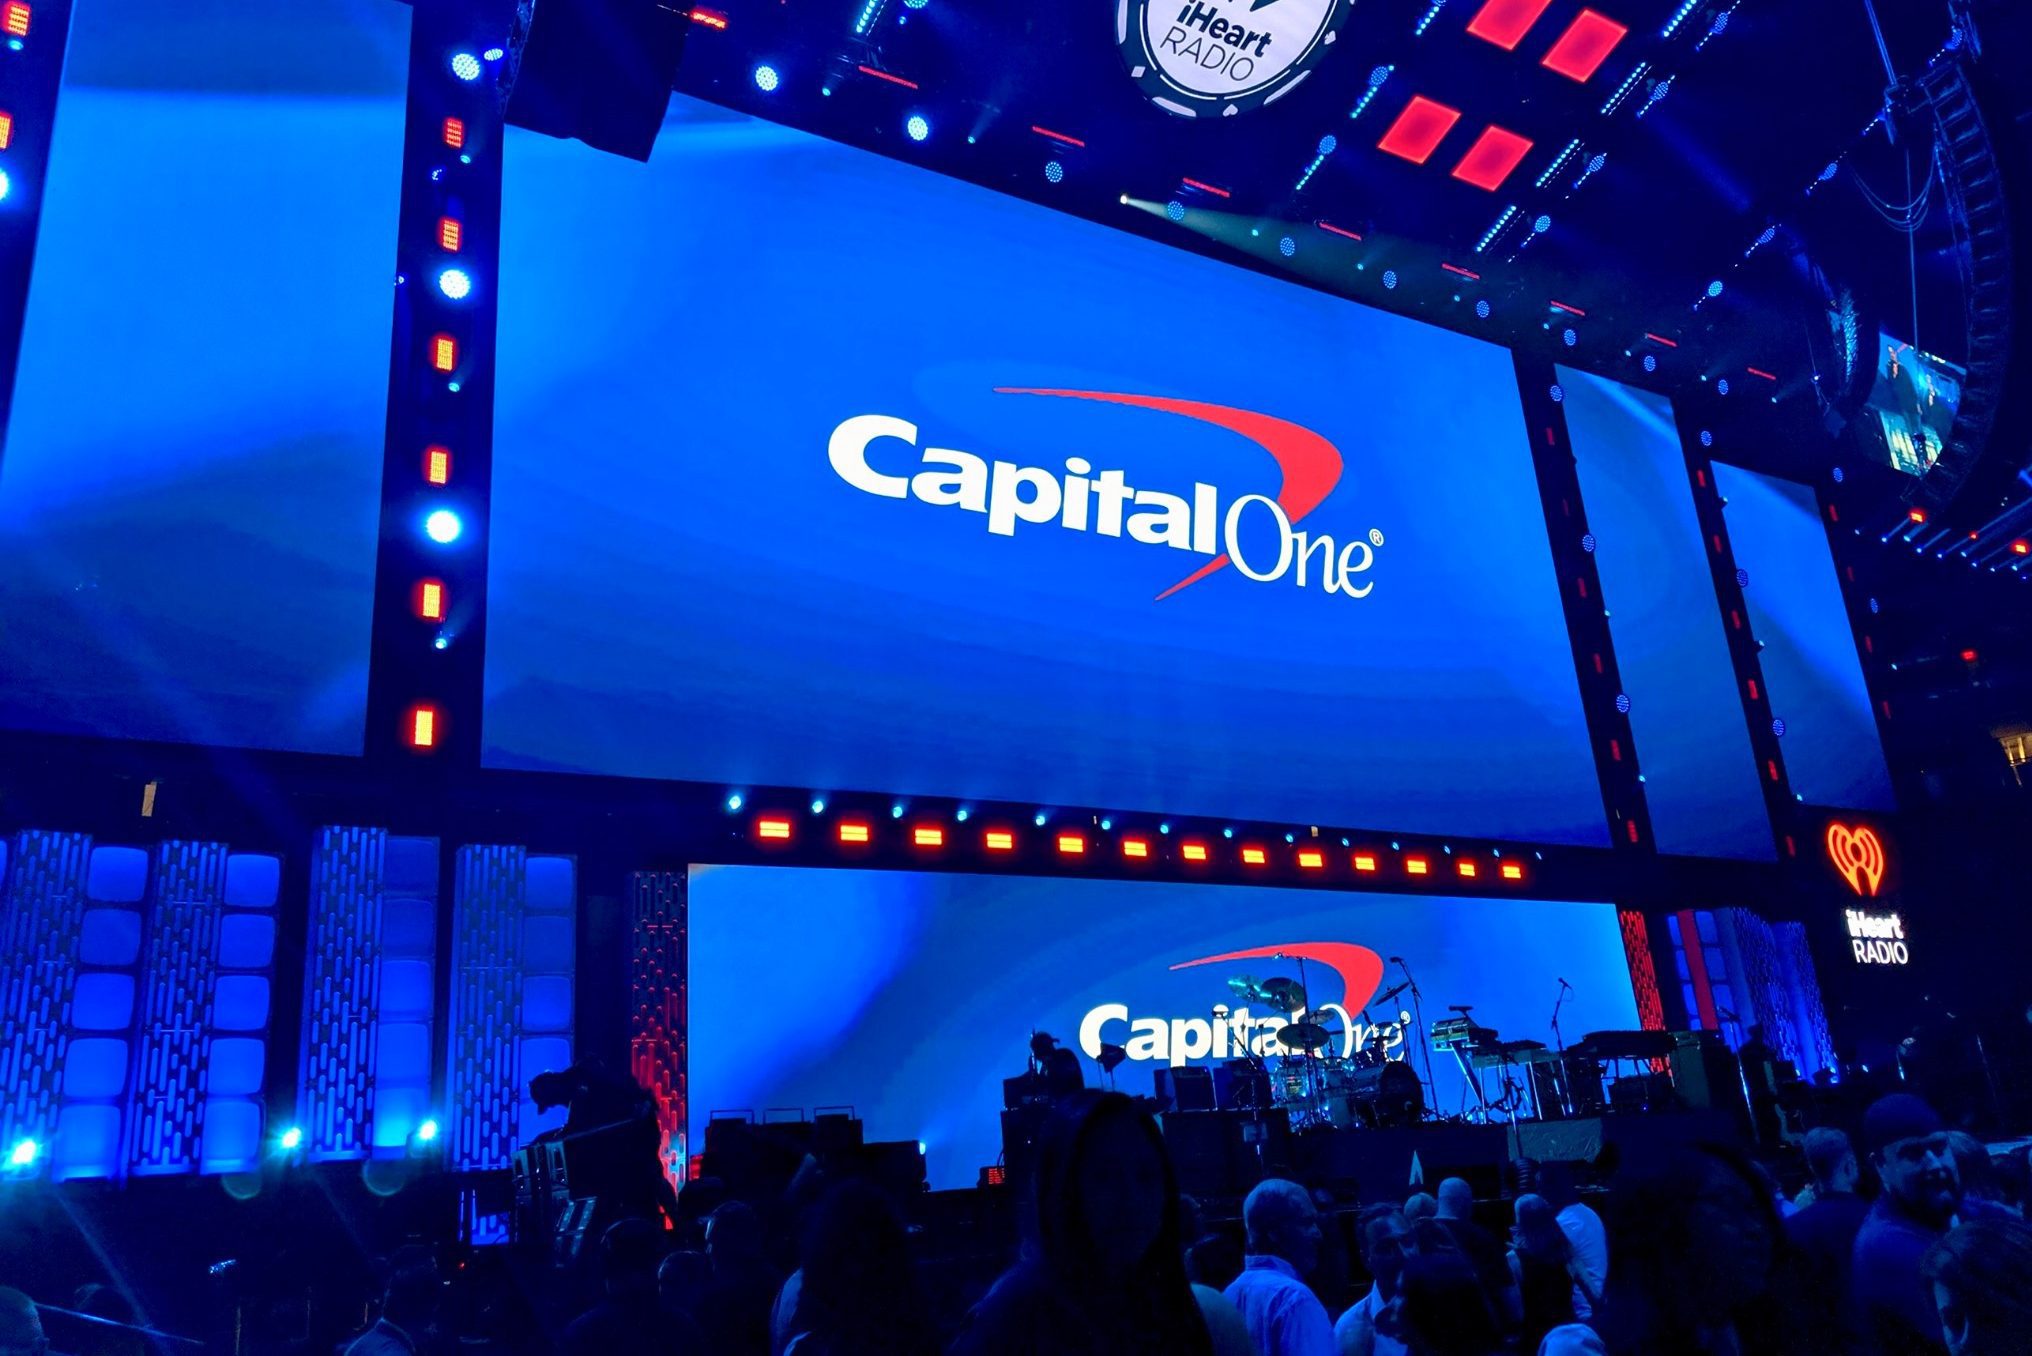 capital one travel for cruises